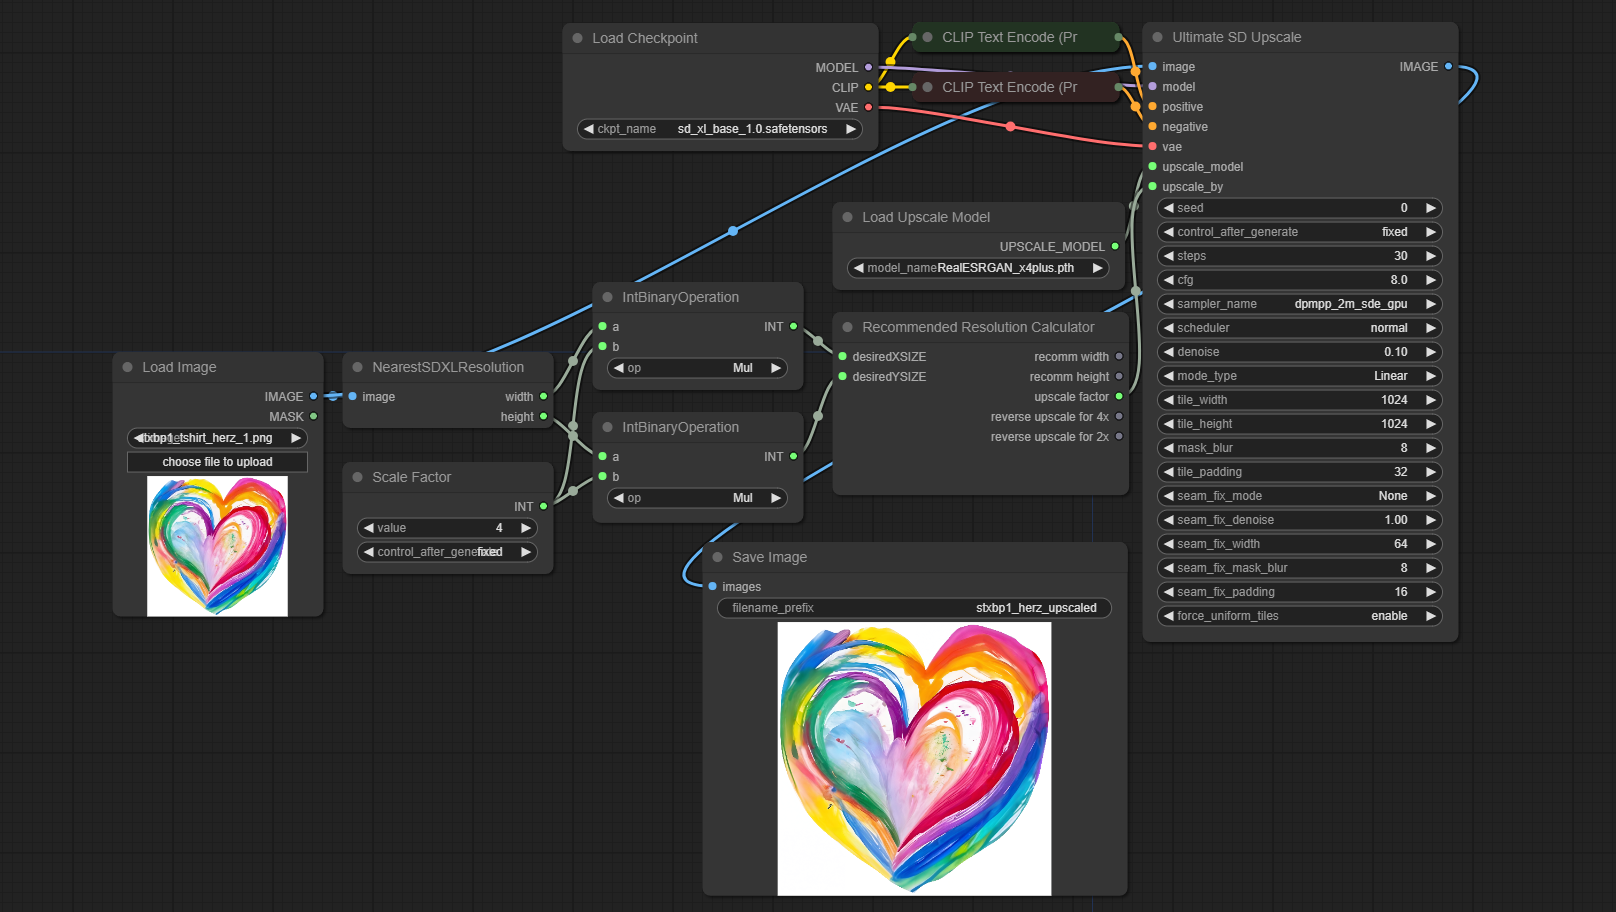 ComfyUI workflow to upscale the selected heart to 4k